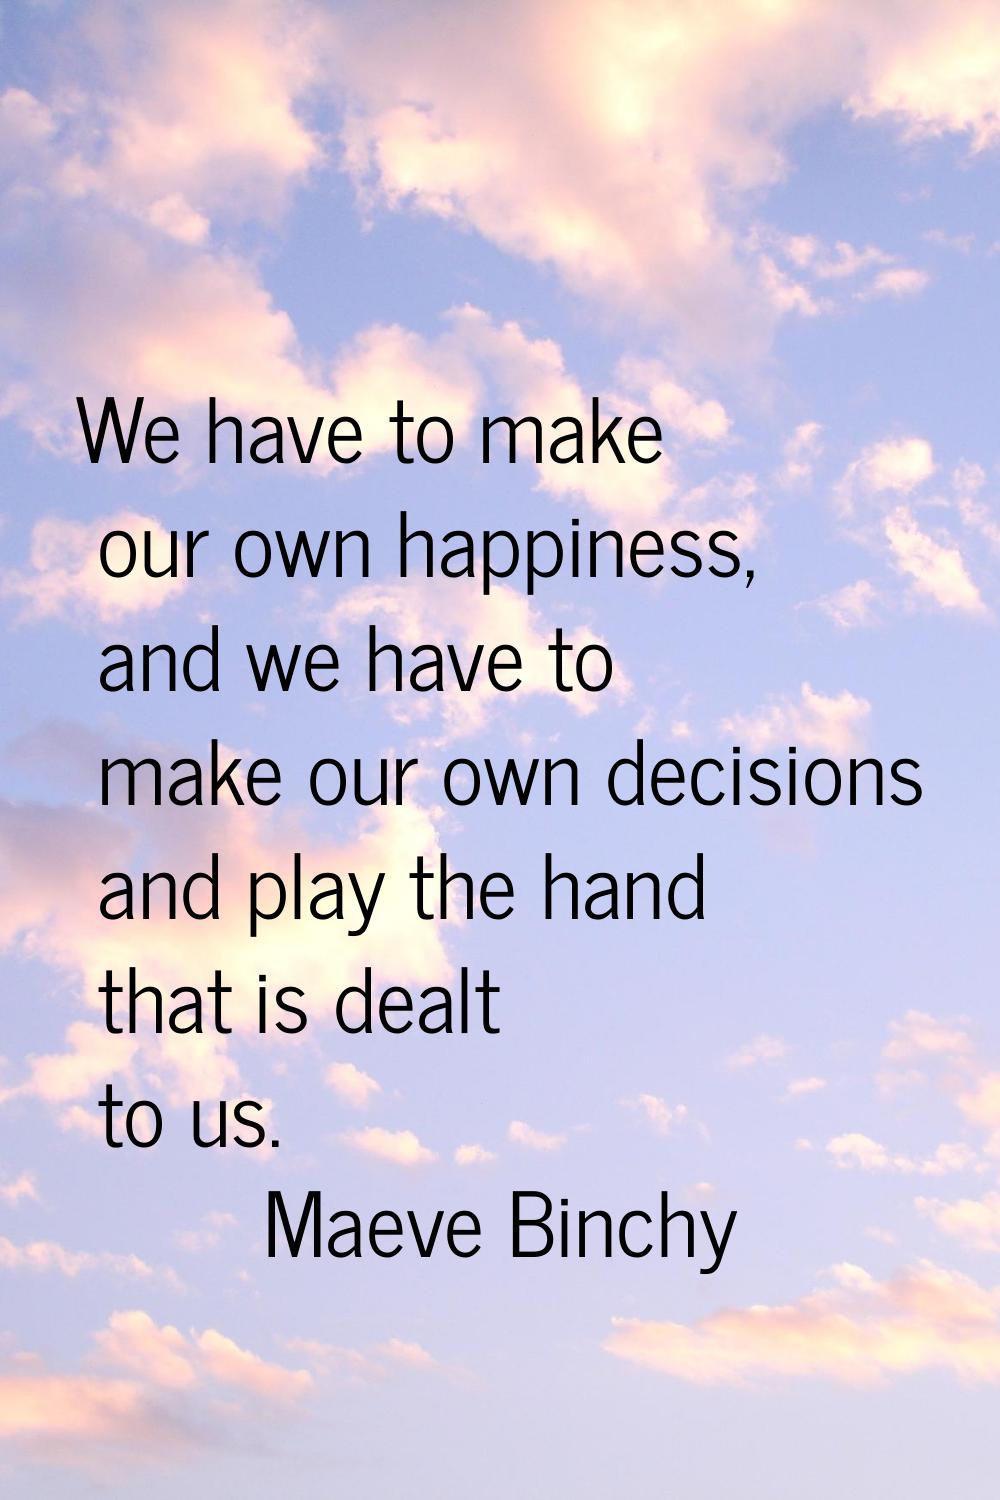 We have to make our own happiness, and we have to make our own decisions and play the hand that is 